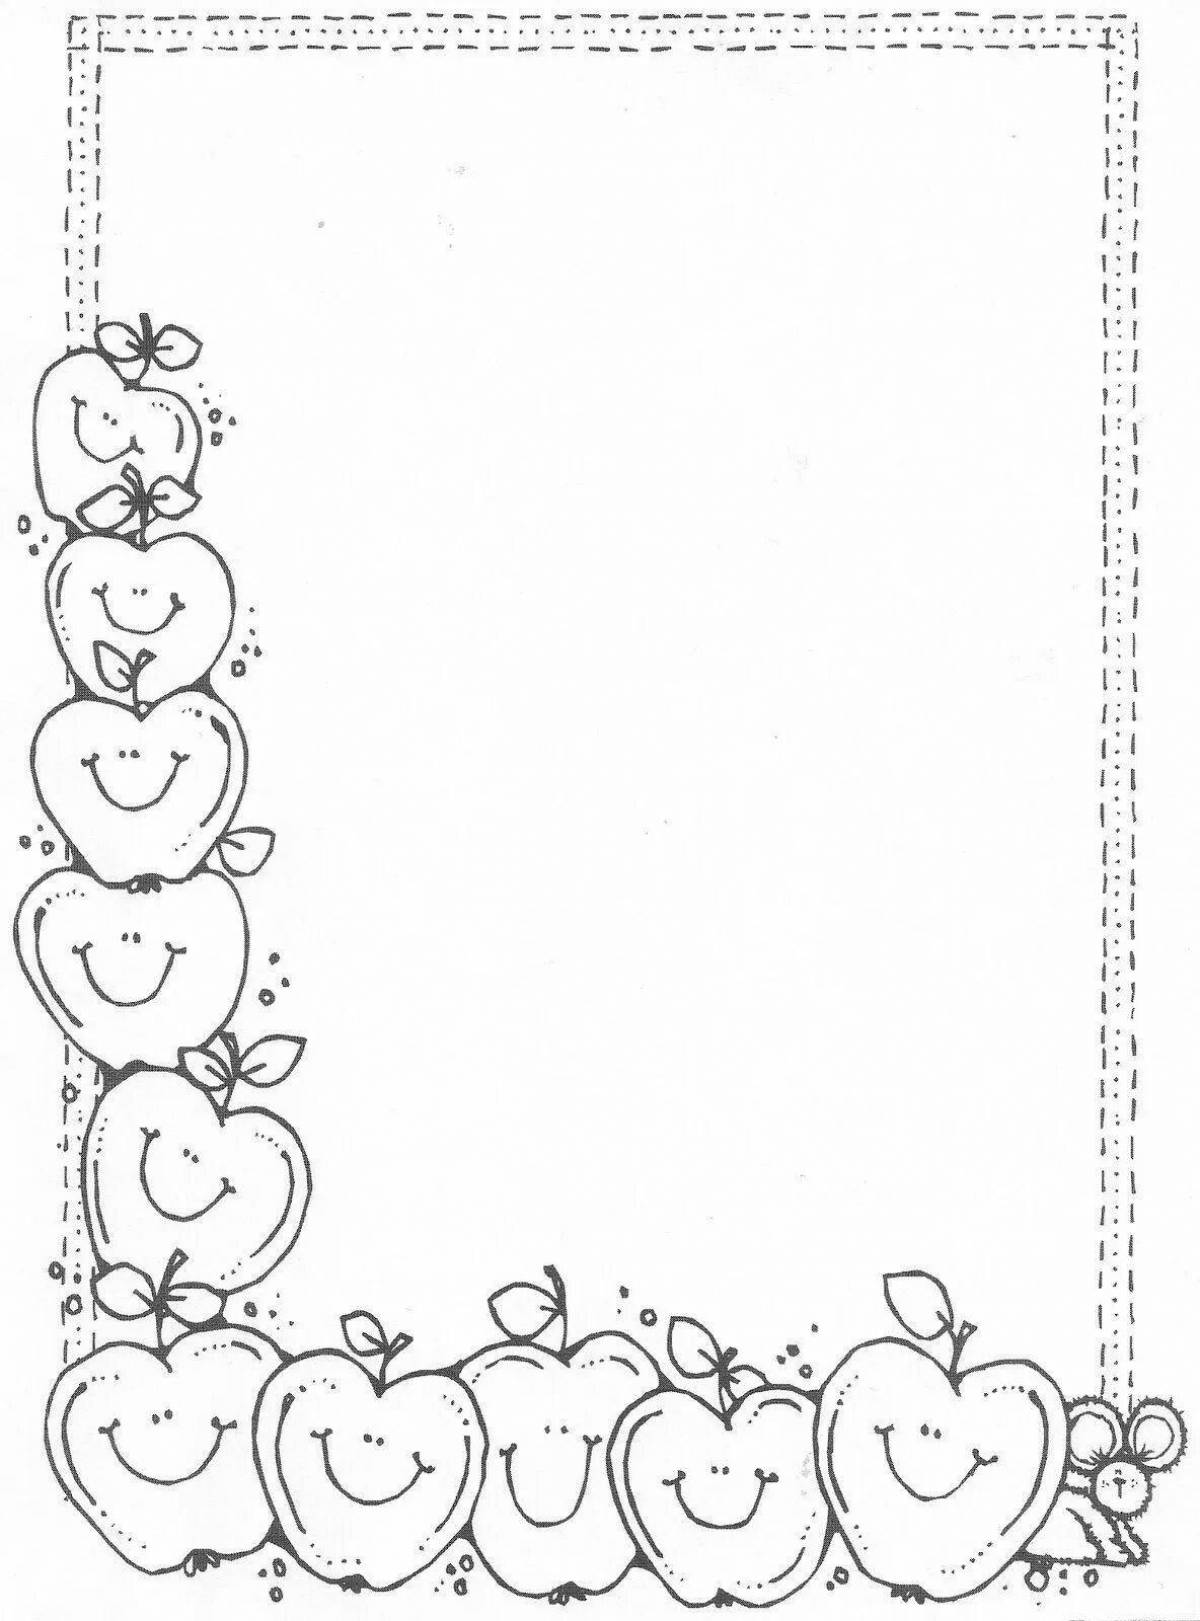 Fun coloring frame for kids